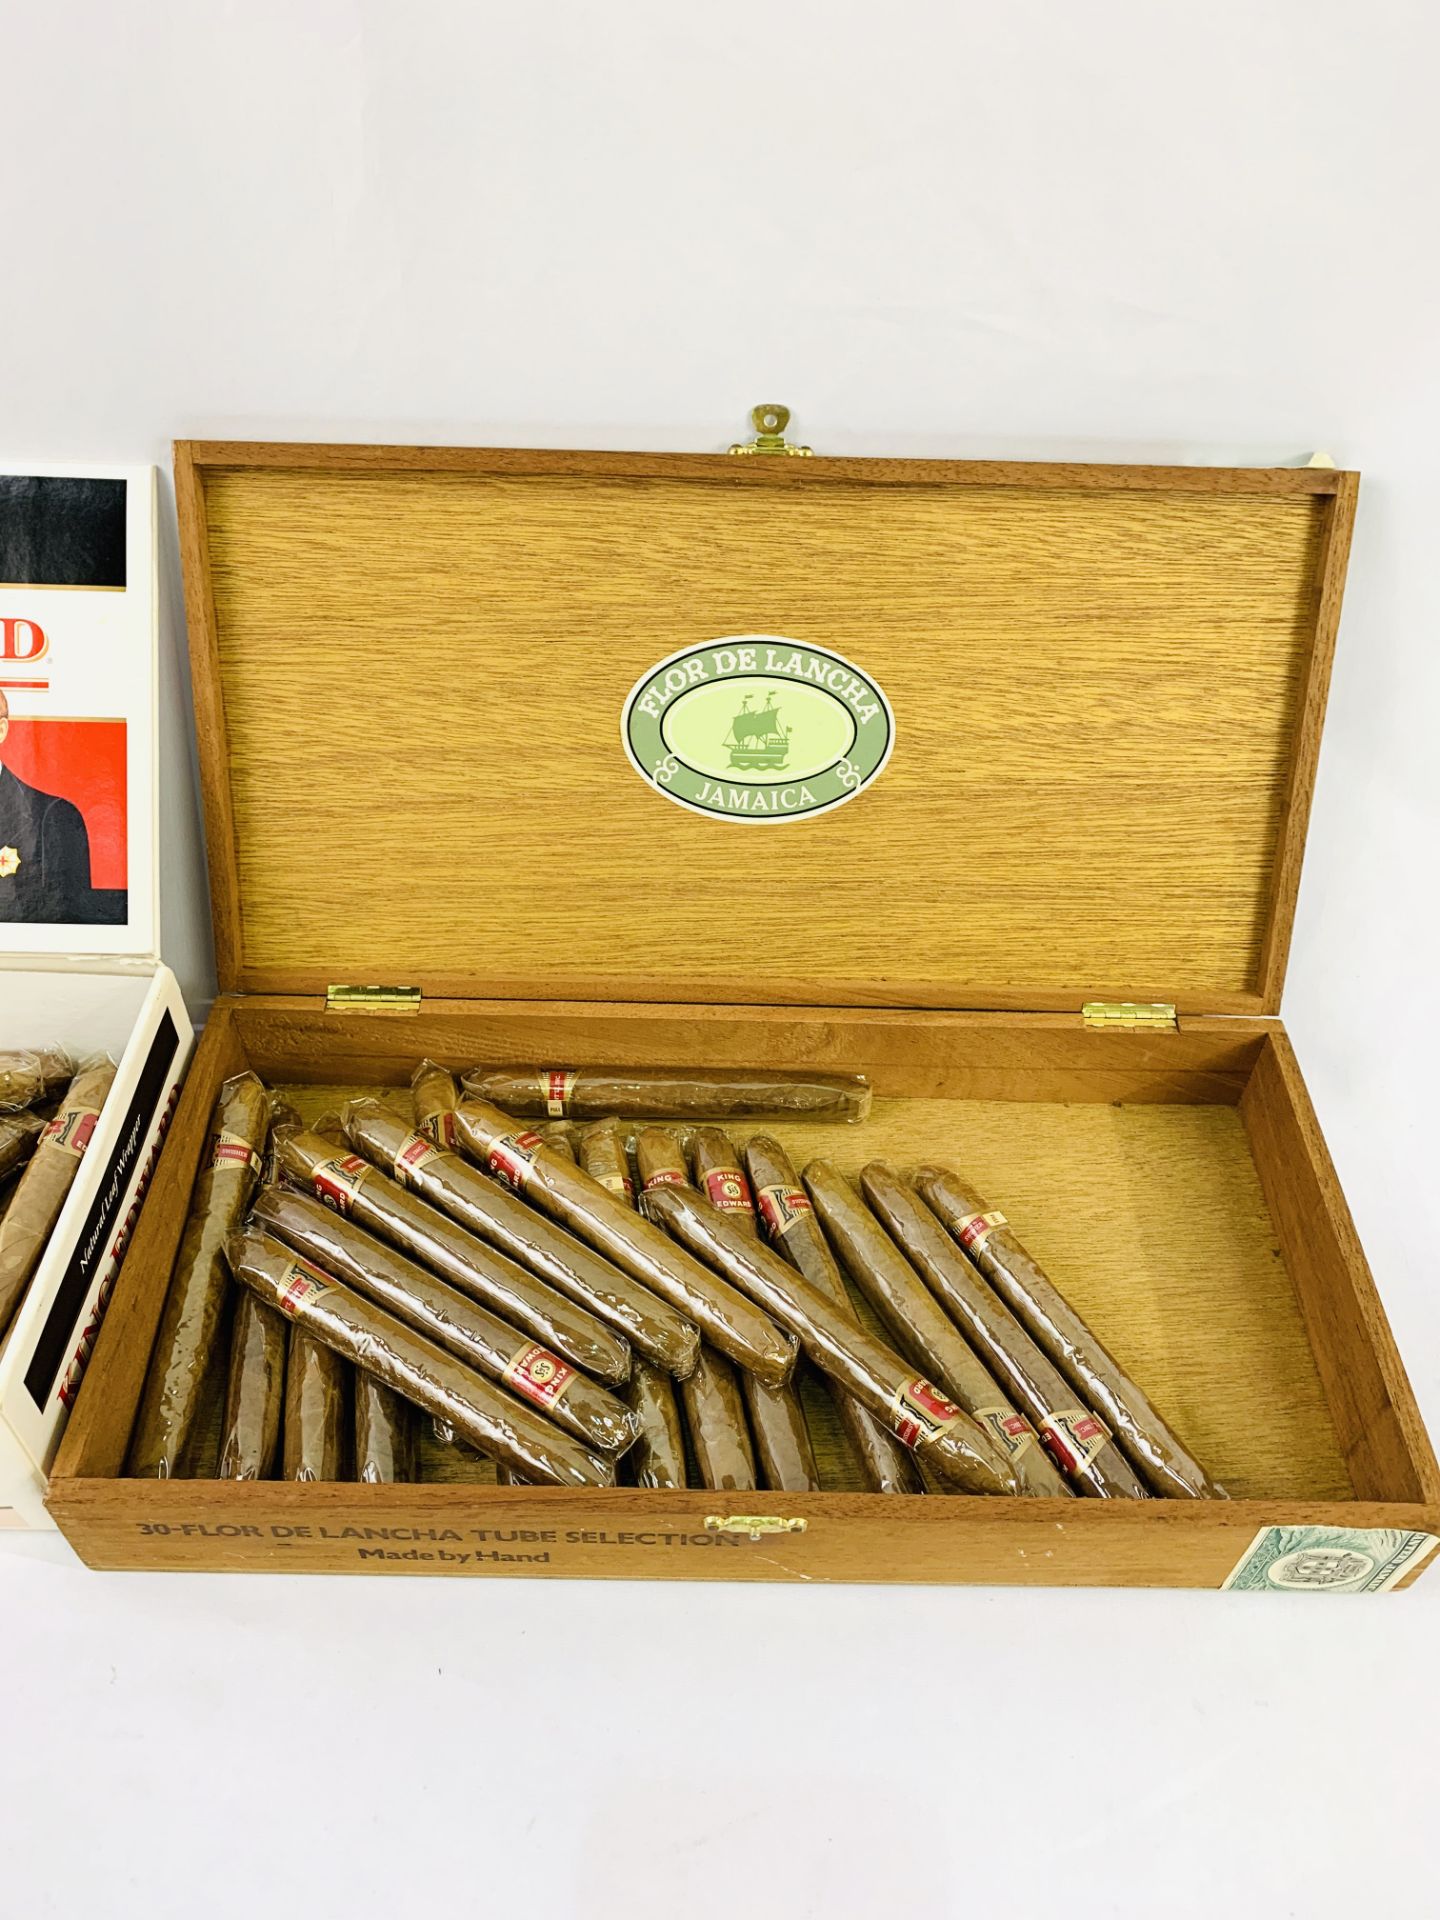 2 part boxes of King Edward Invincible coronas, containing a total of 41 cigars - Image 3 of 4